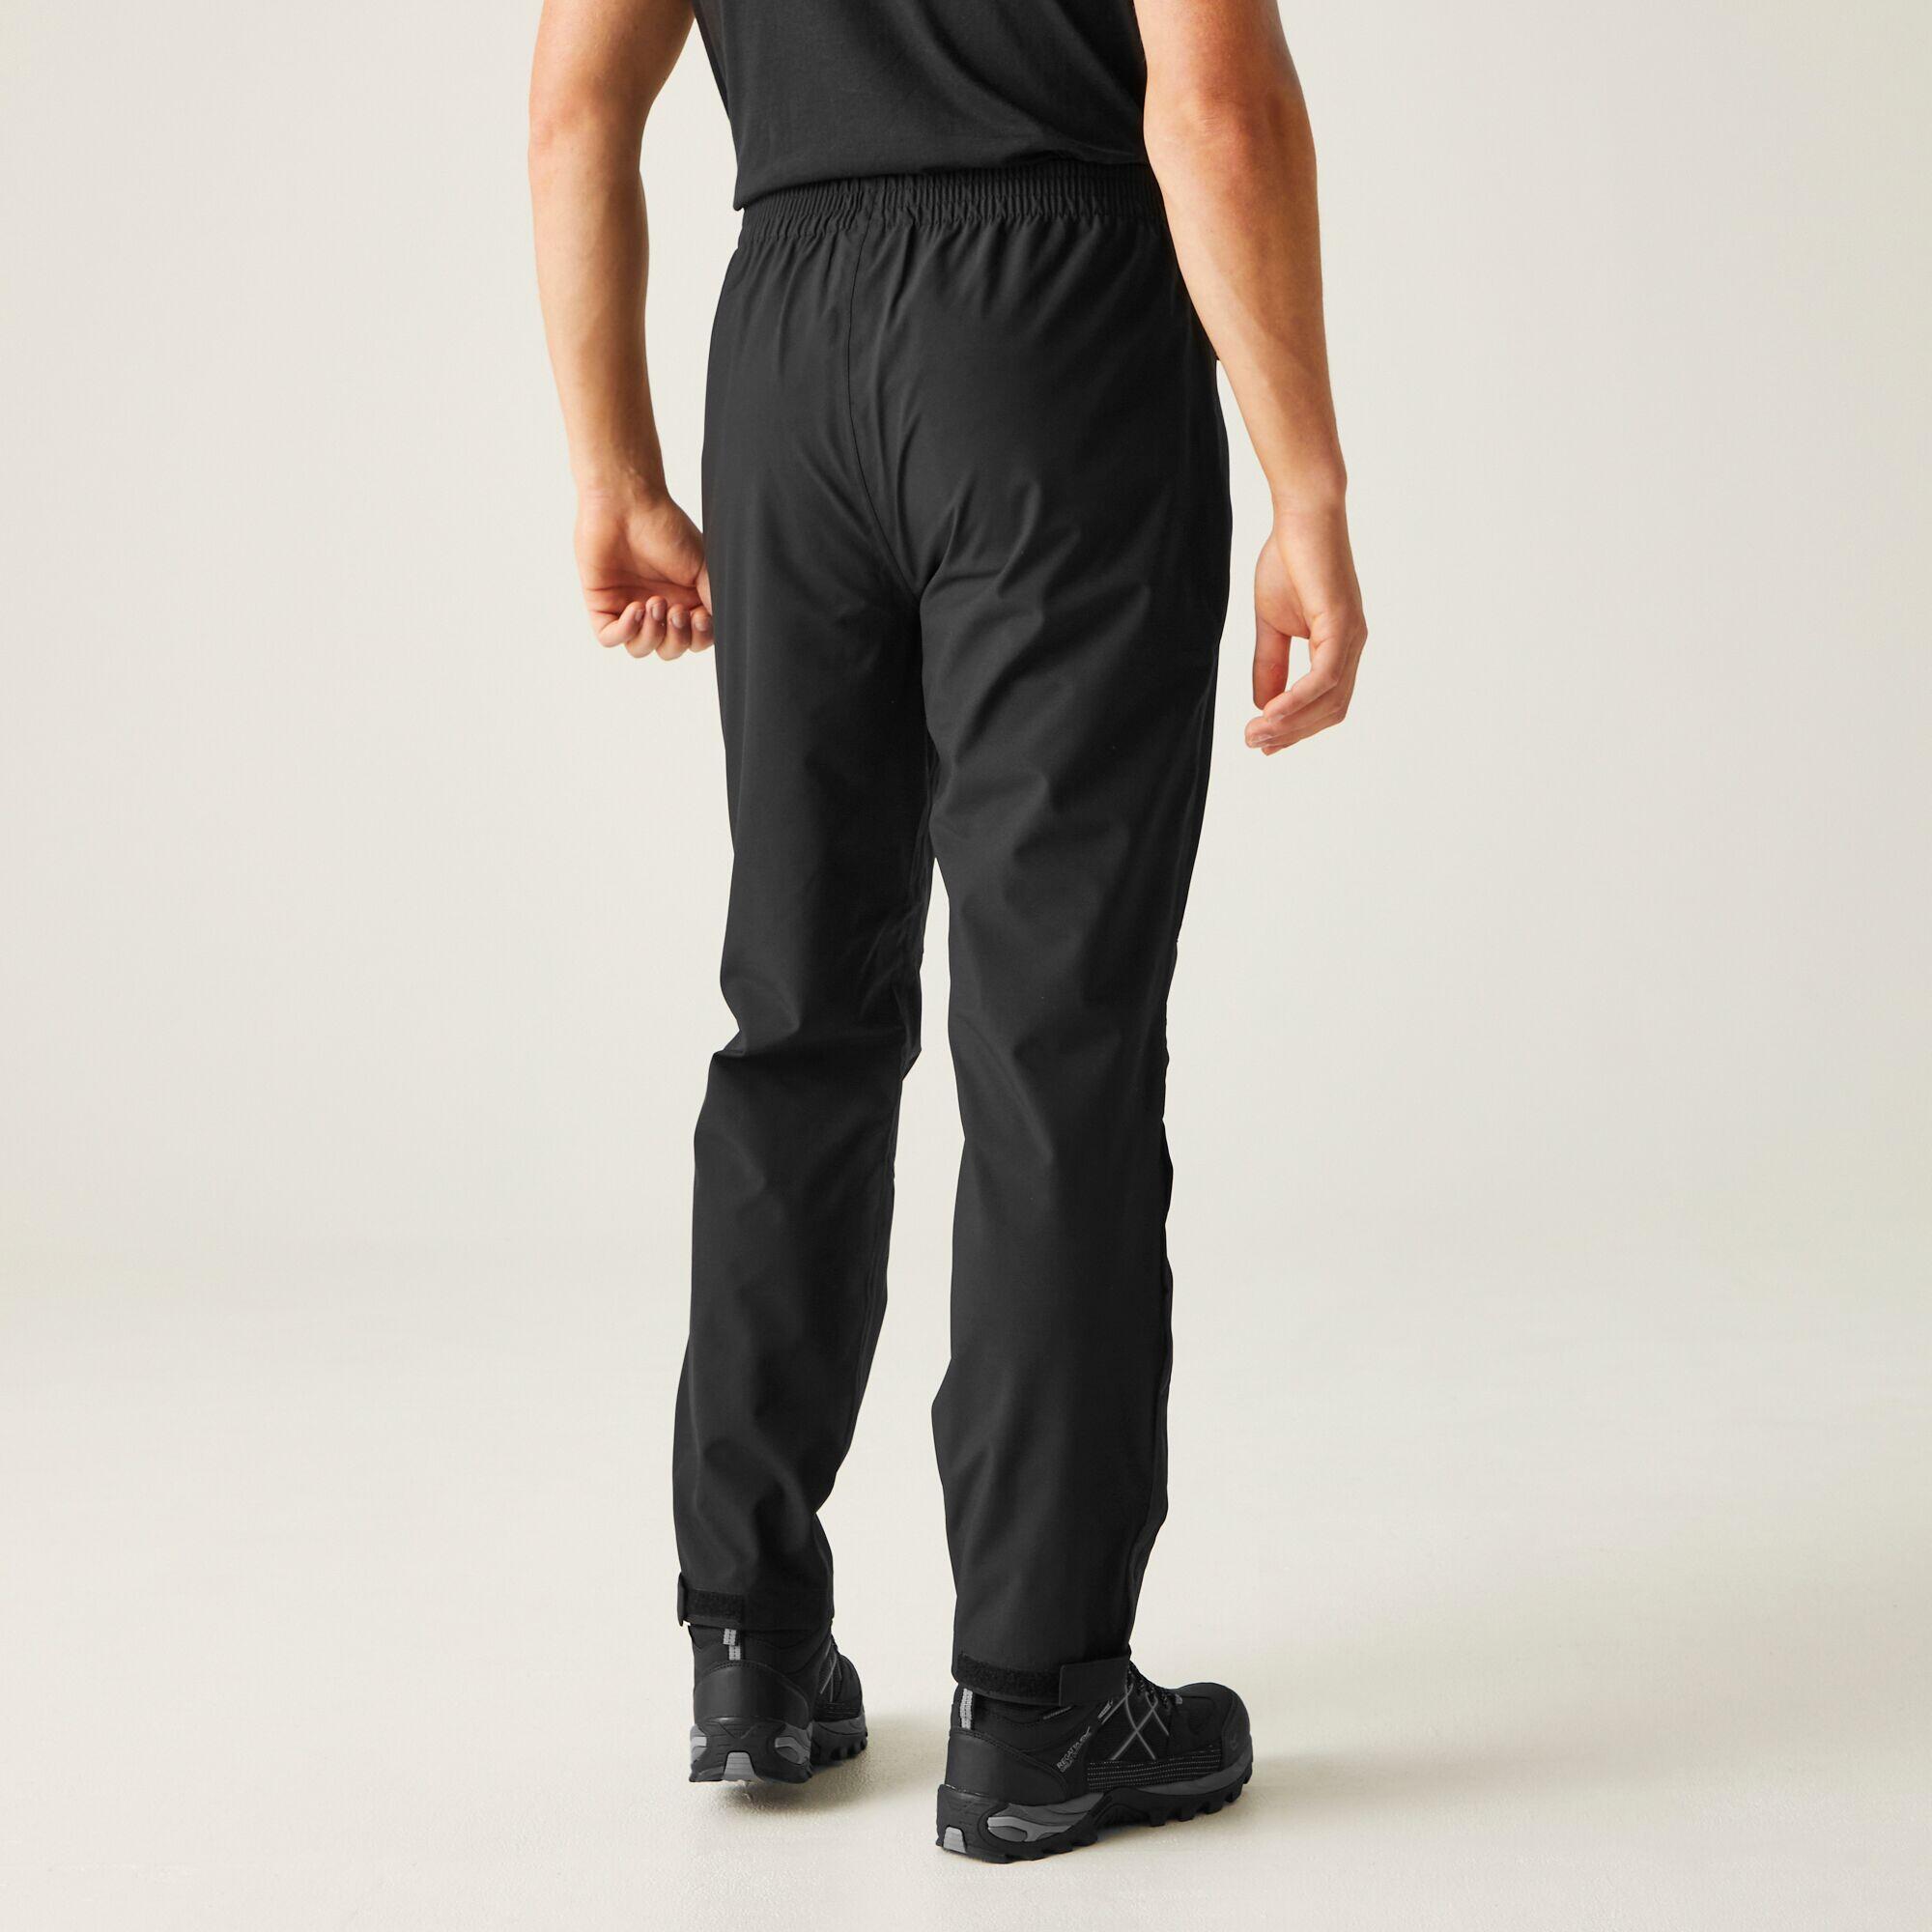 Highton Stretch Men's Hiking Overtrousers - Black 2/6